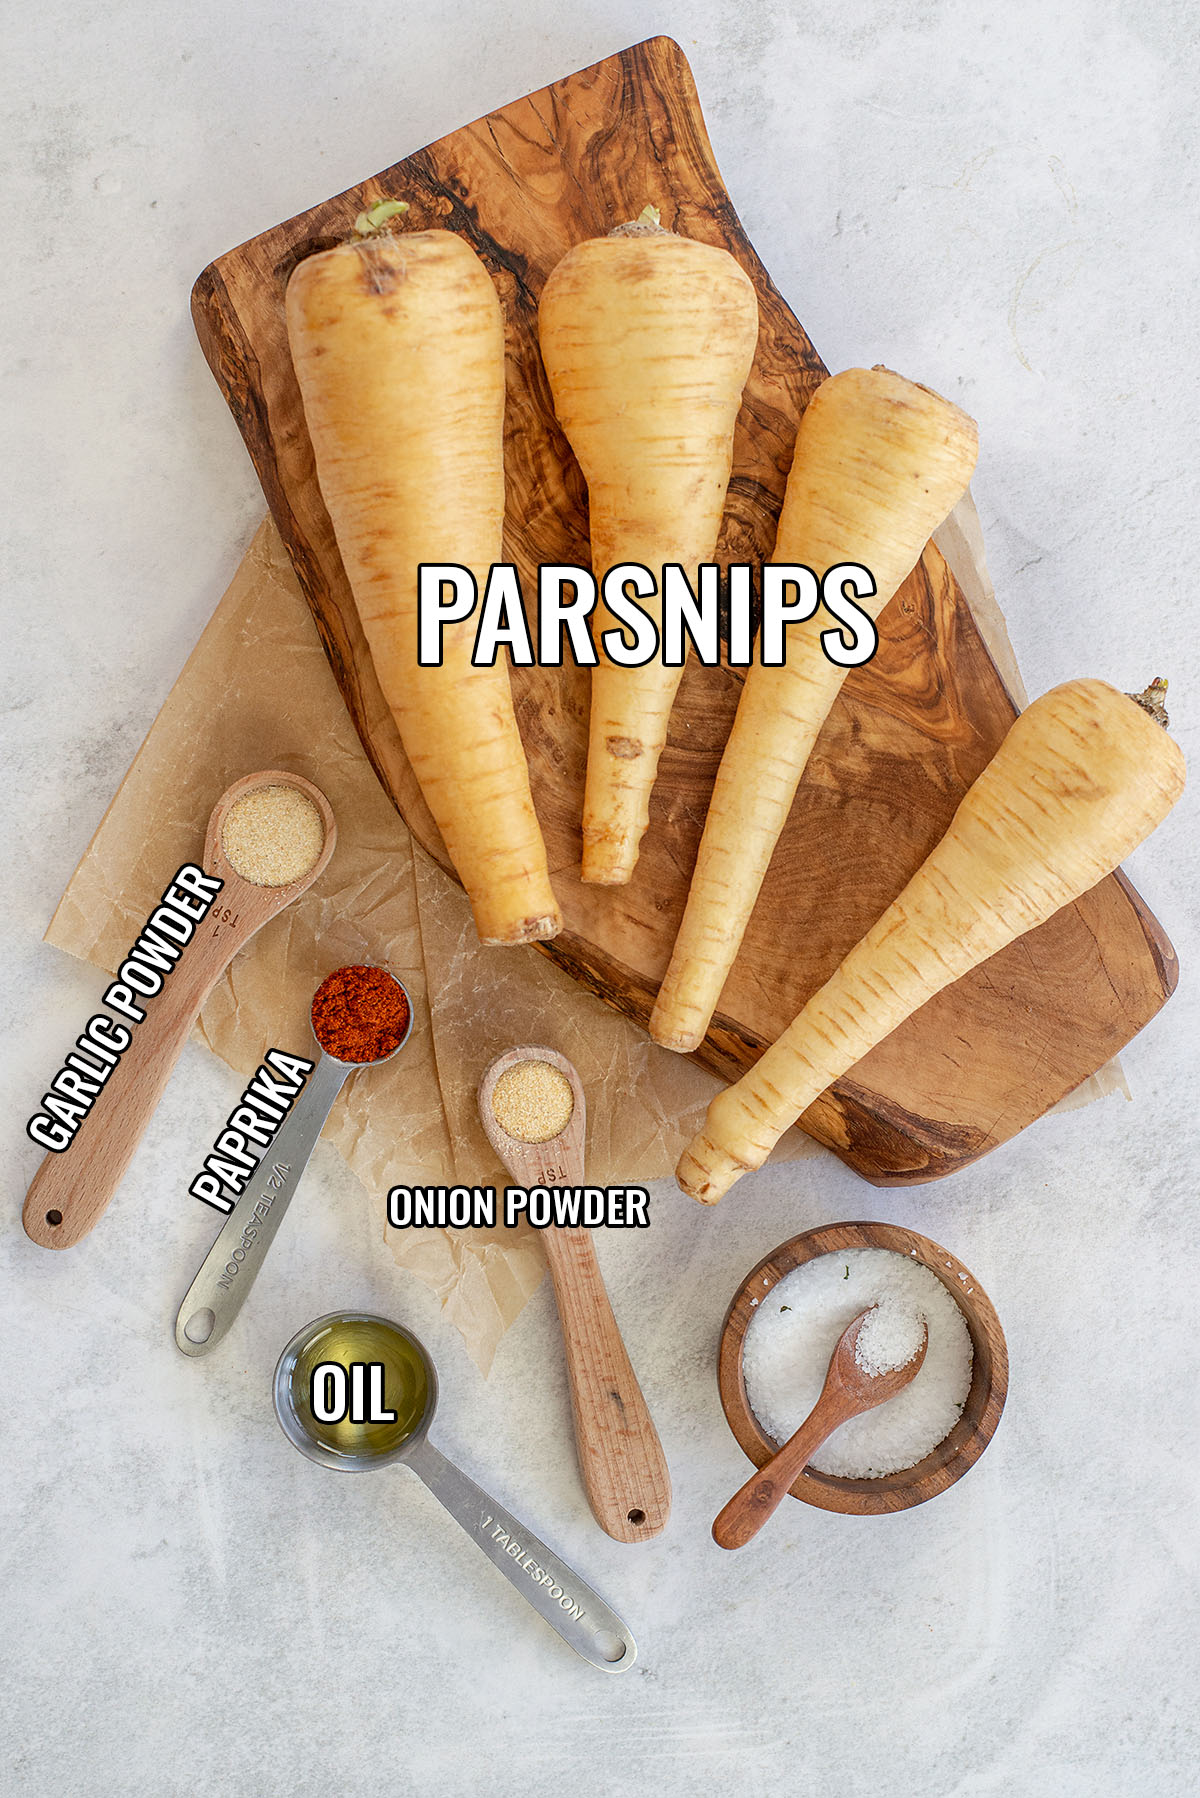 Parsnip fry ingredients spread out on a countertop.